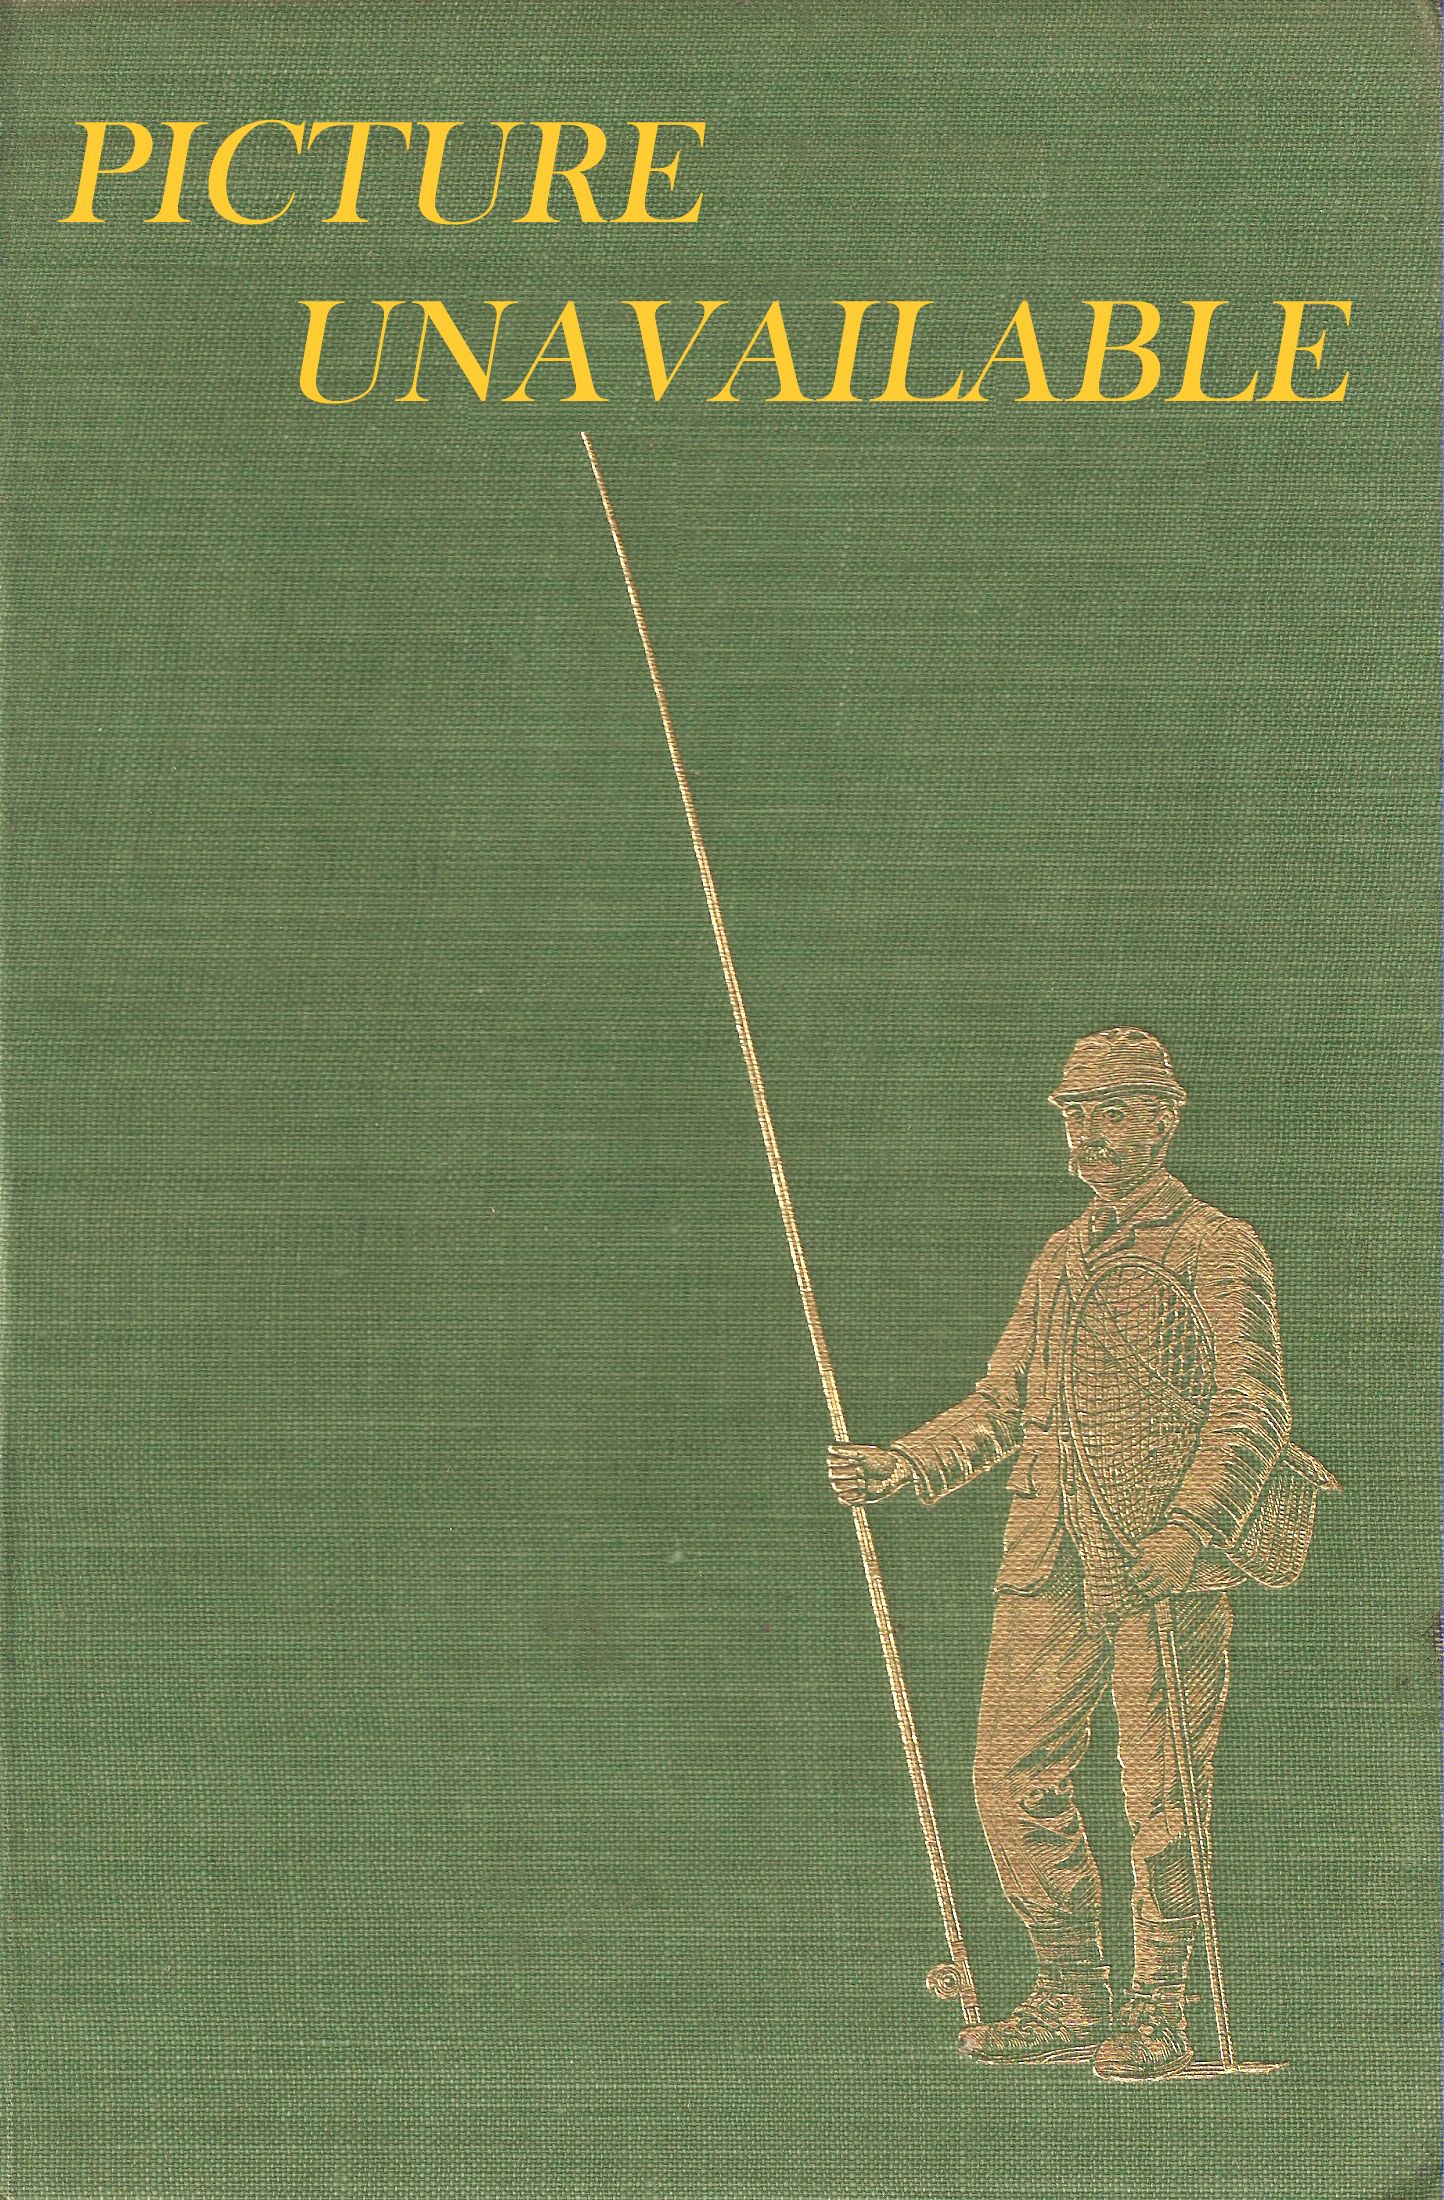 PRACTICAL FLY-FISHING FOUNDED ON NATURE. By John Beever, late of the Thwaite House, Coniston, a new edition with a memoir of the author by W.G. Collingwood, also additional notes on char fishing by A. and A.R. Severn.